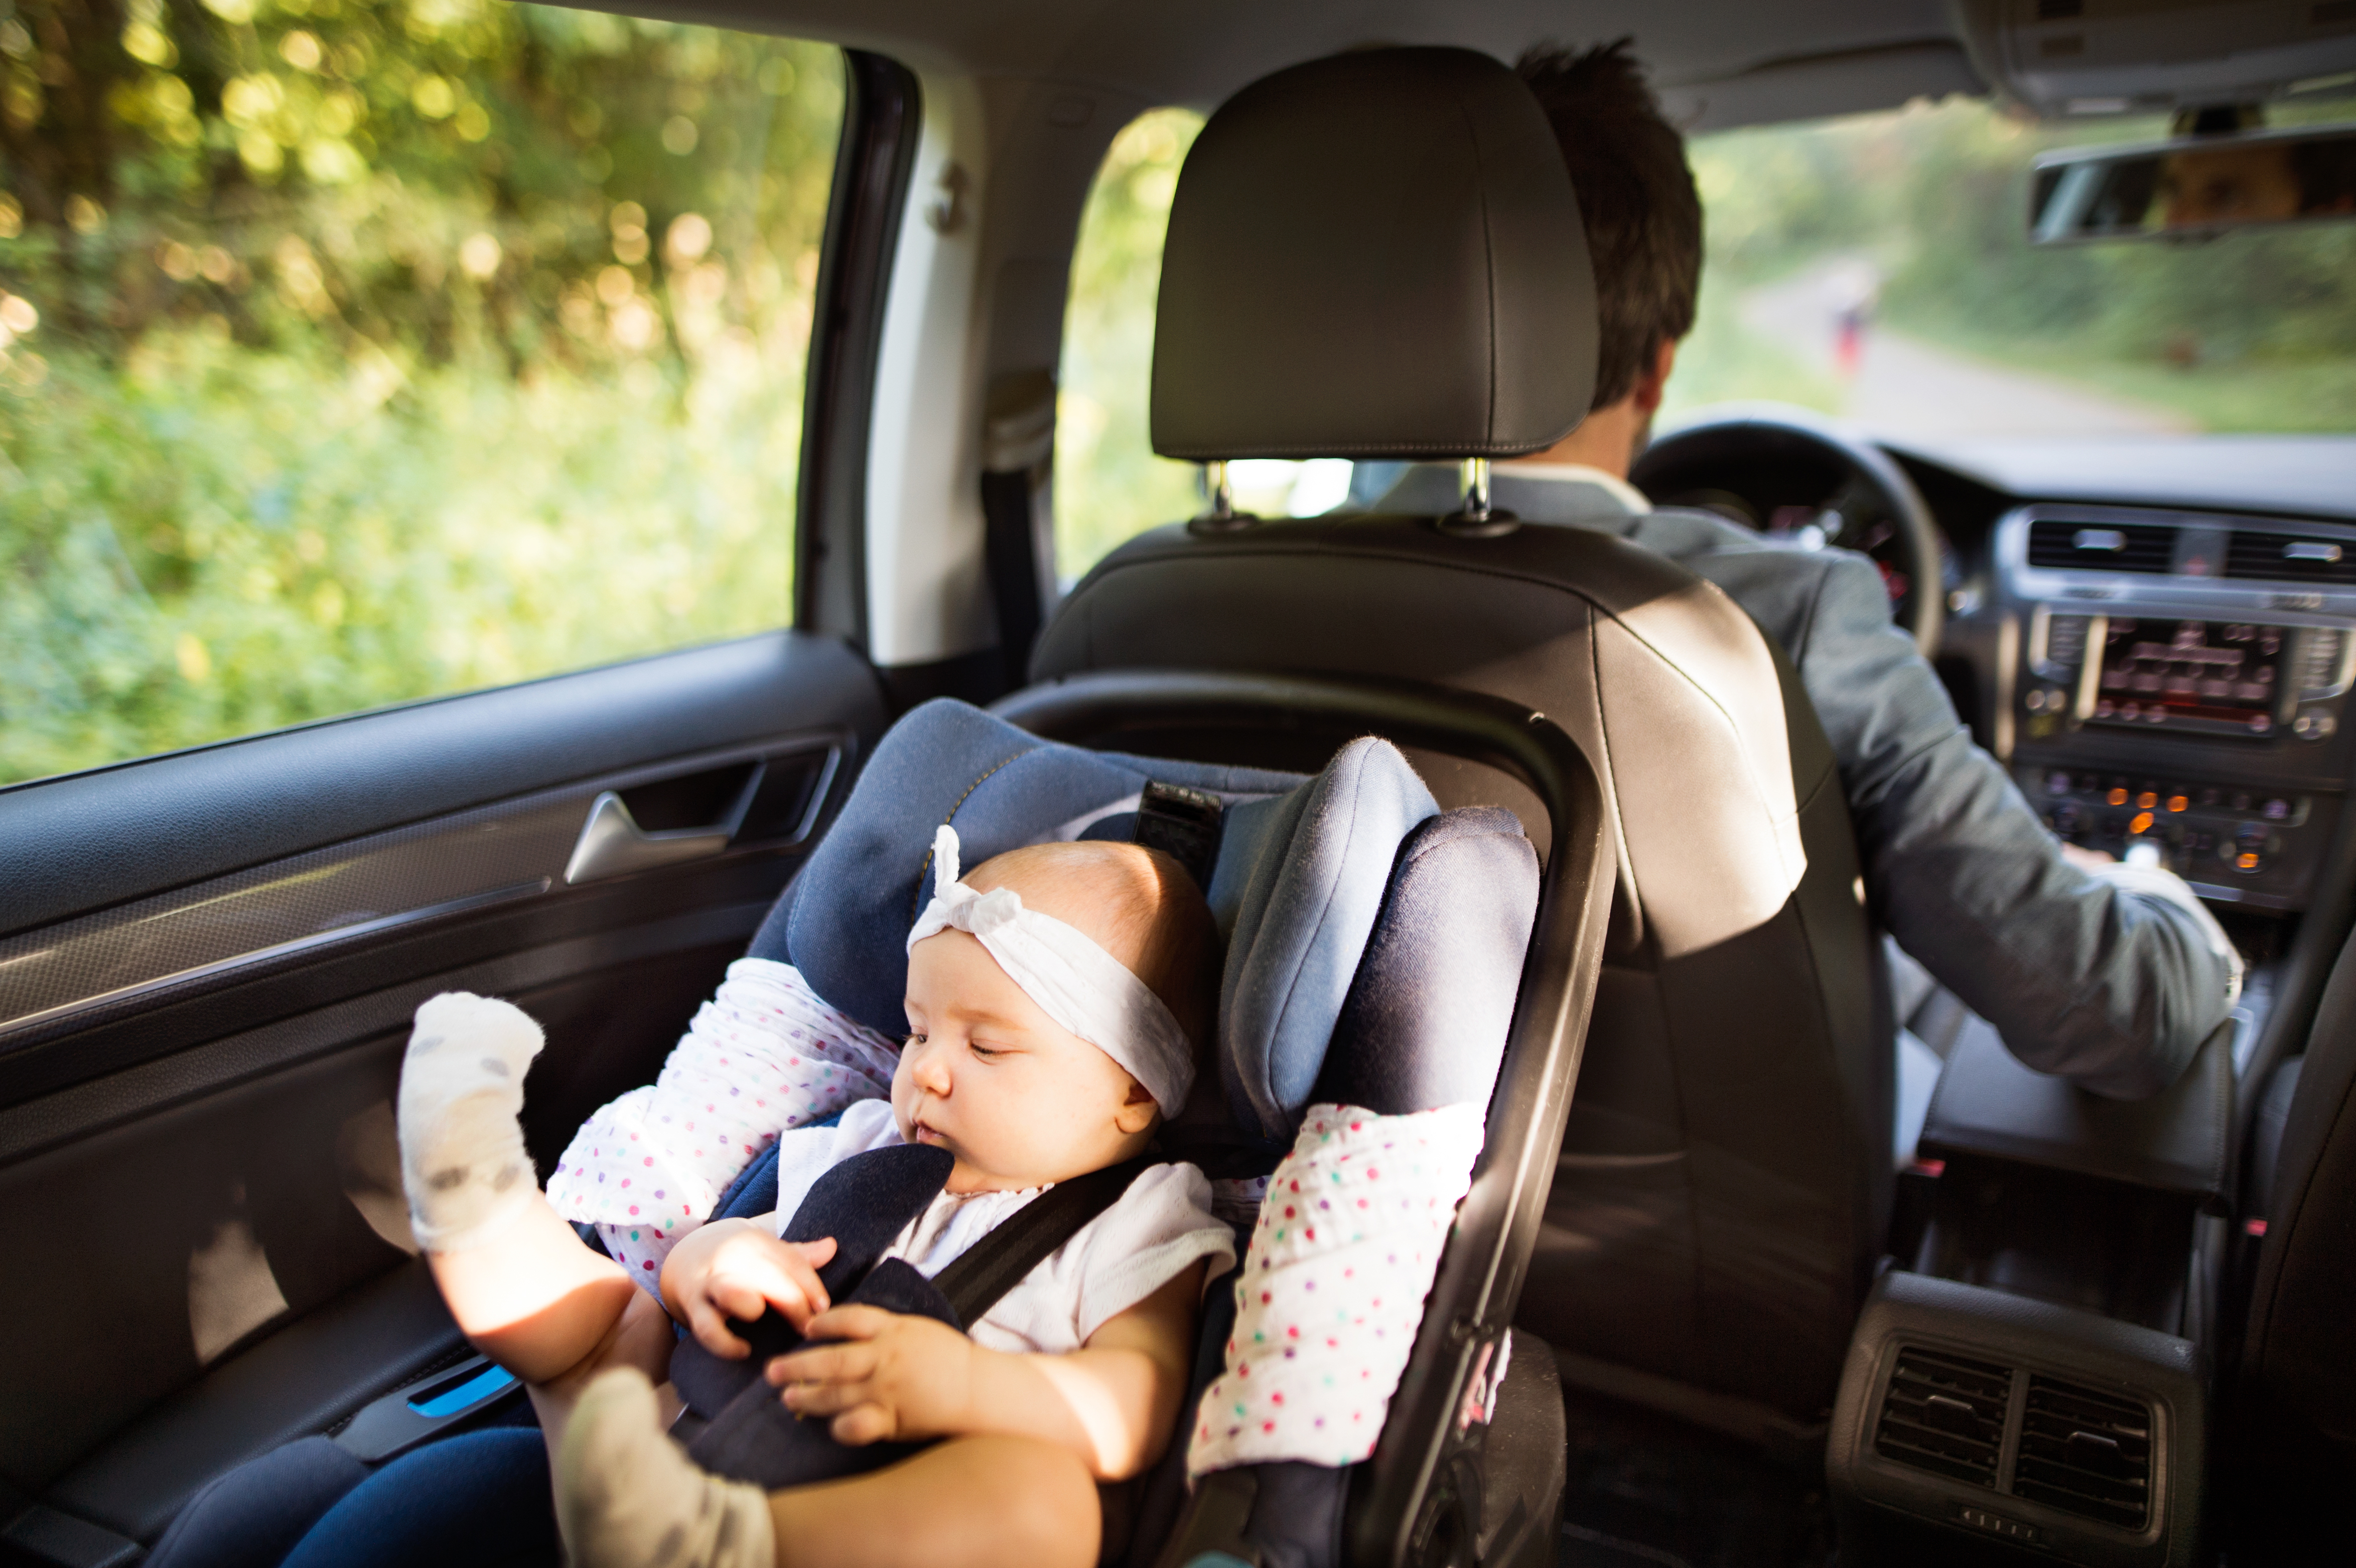 A man driving while a child sleeps in the backseat | Source: Shutterstock